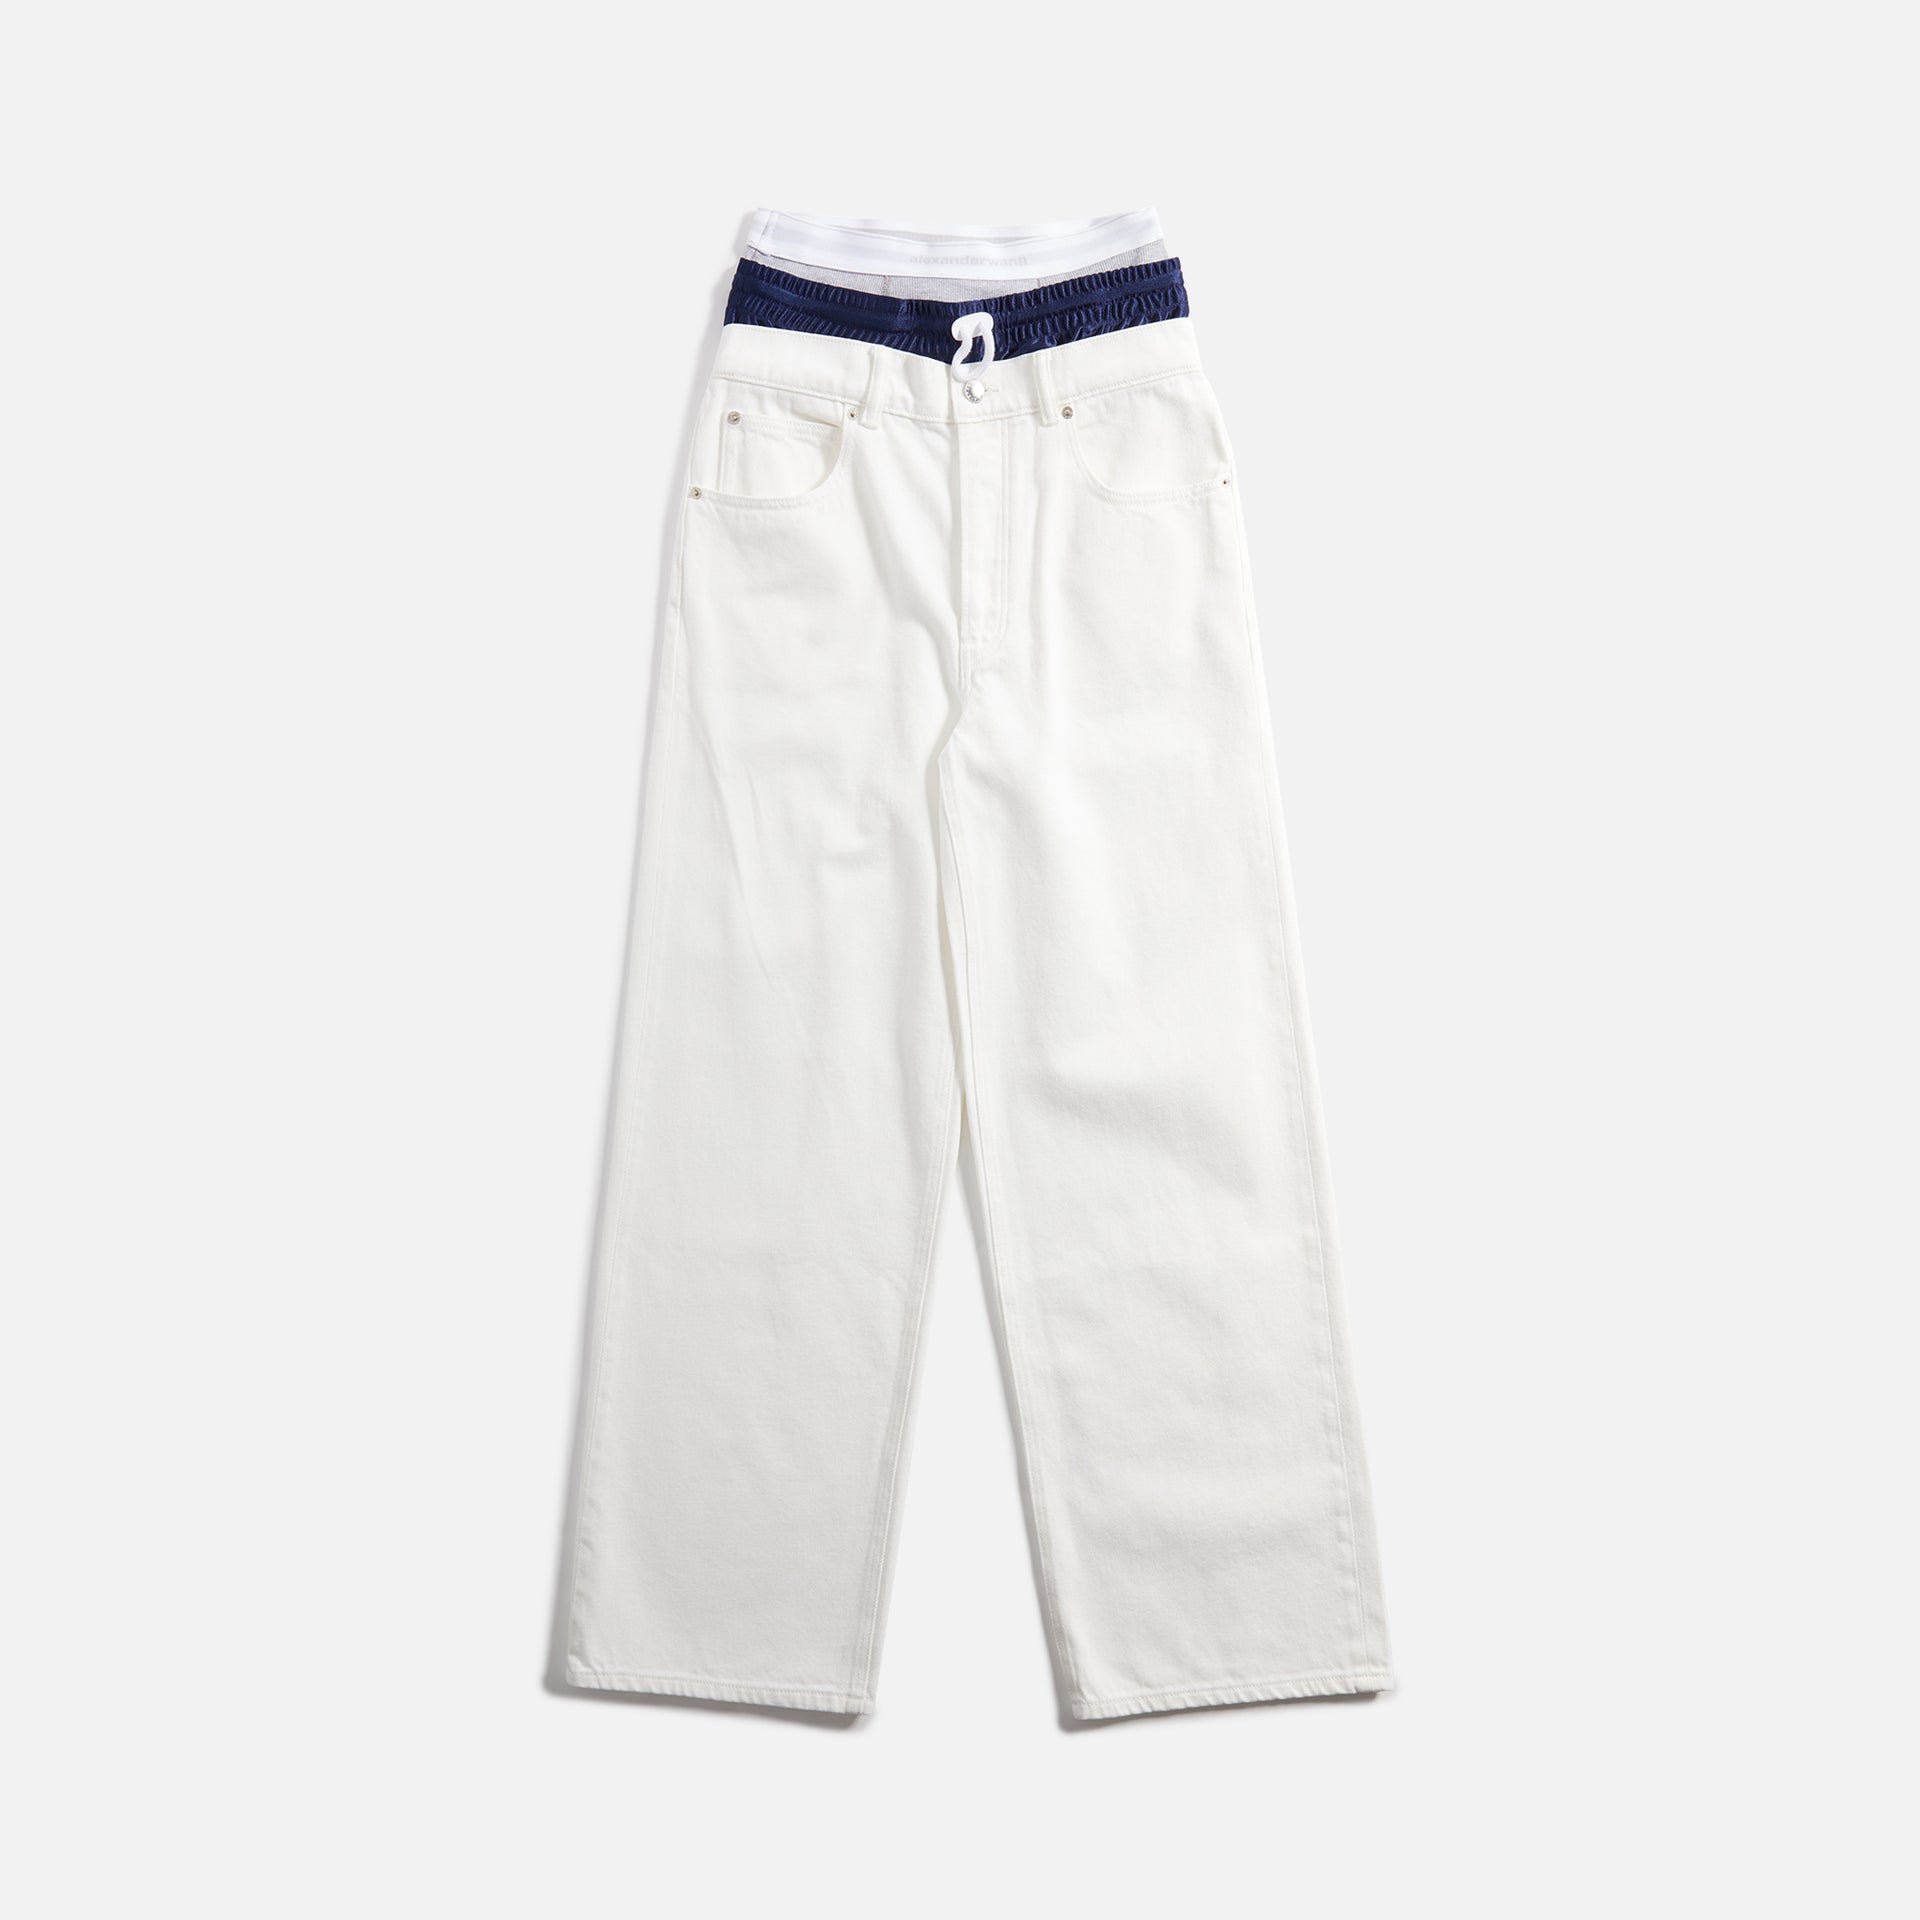 T by Alexander Wang Pre-Styled Tri-Layer 5 Pocket Jean - White